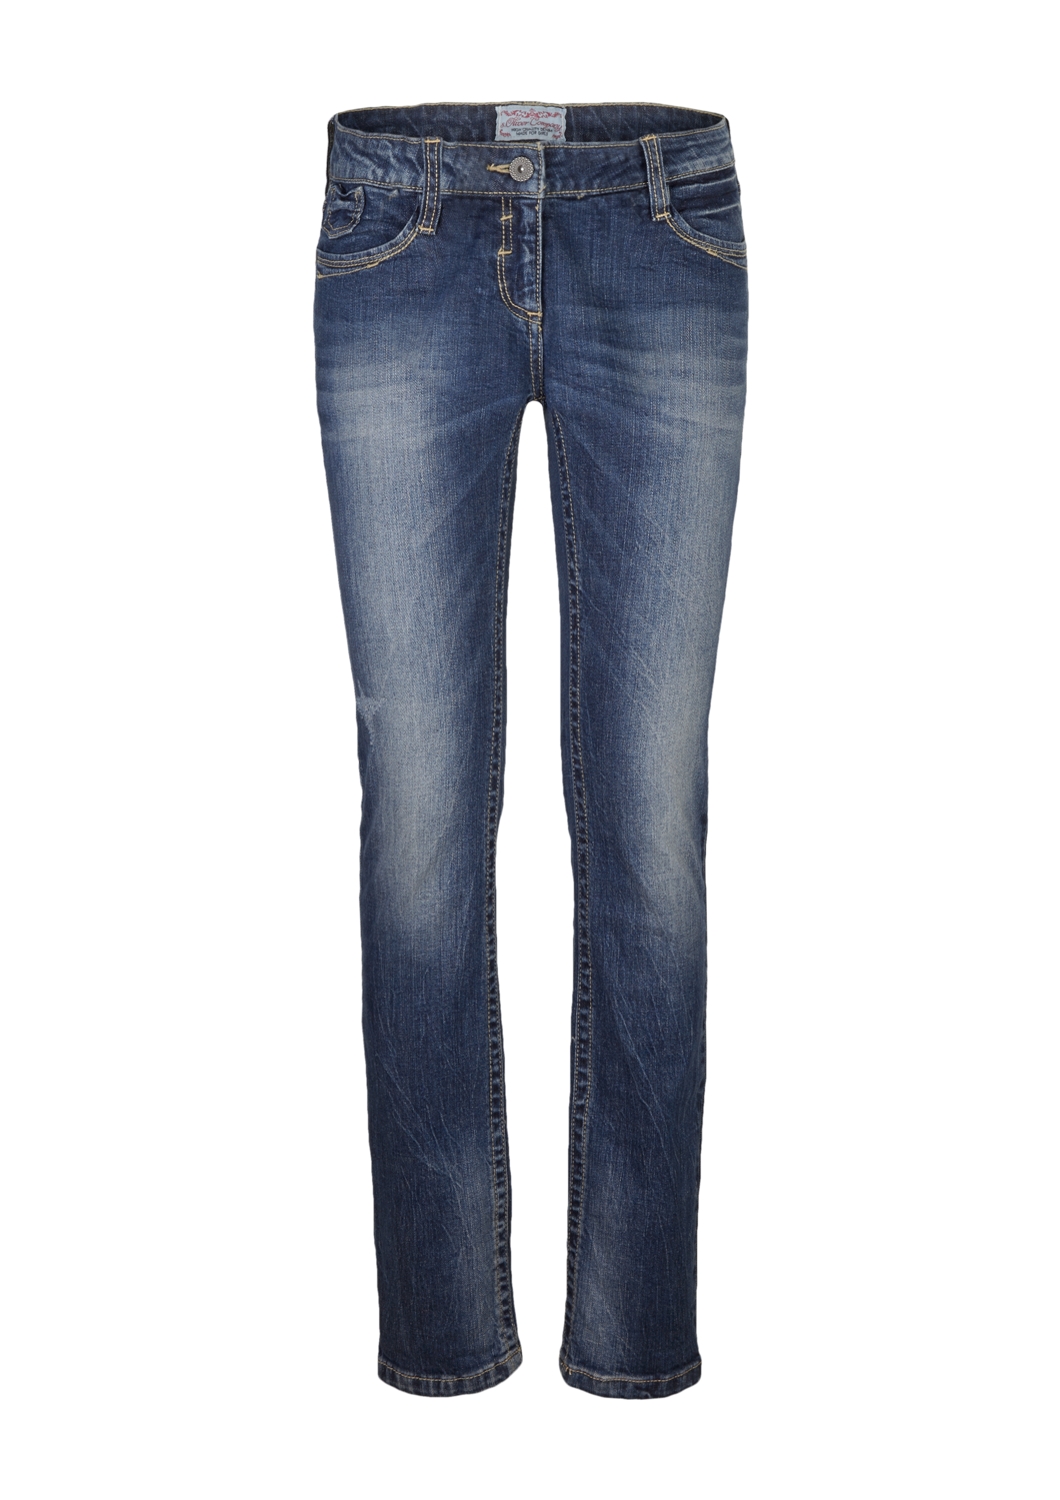 Jeans: Order now in the s.Oliver online shop